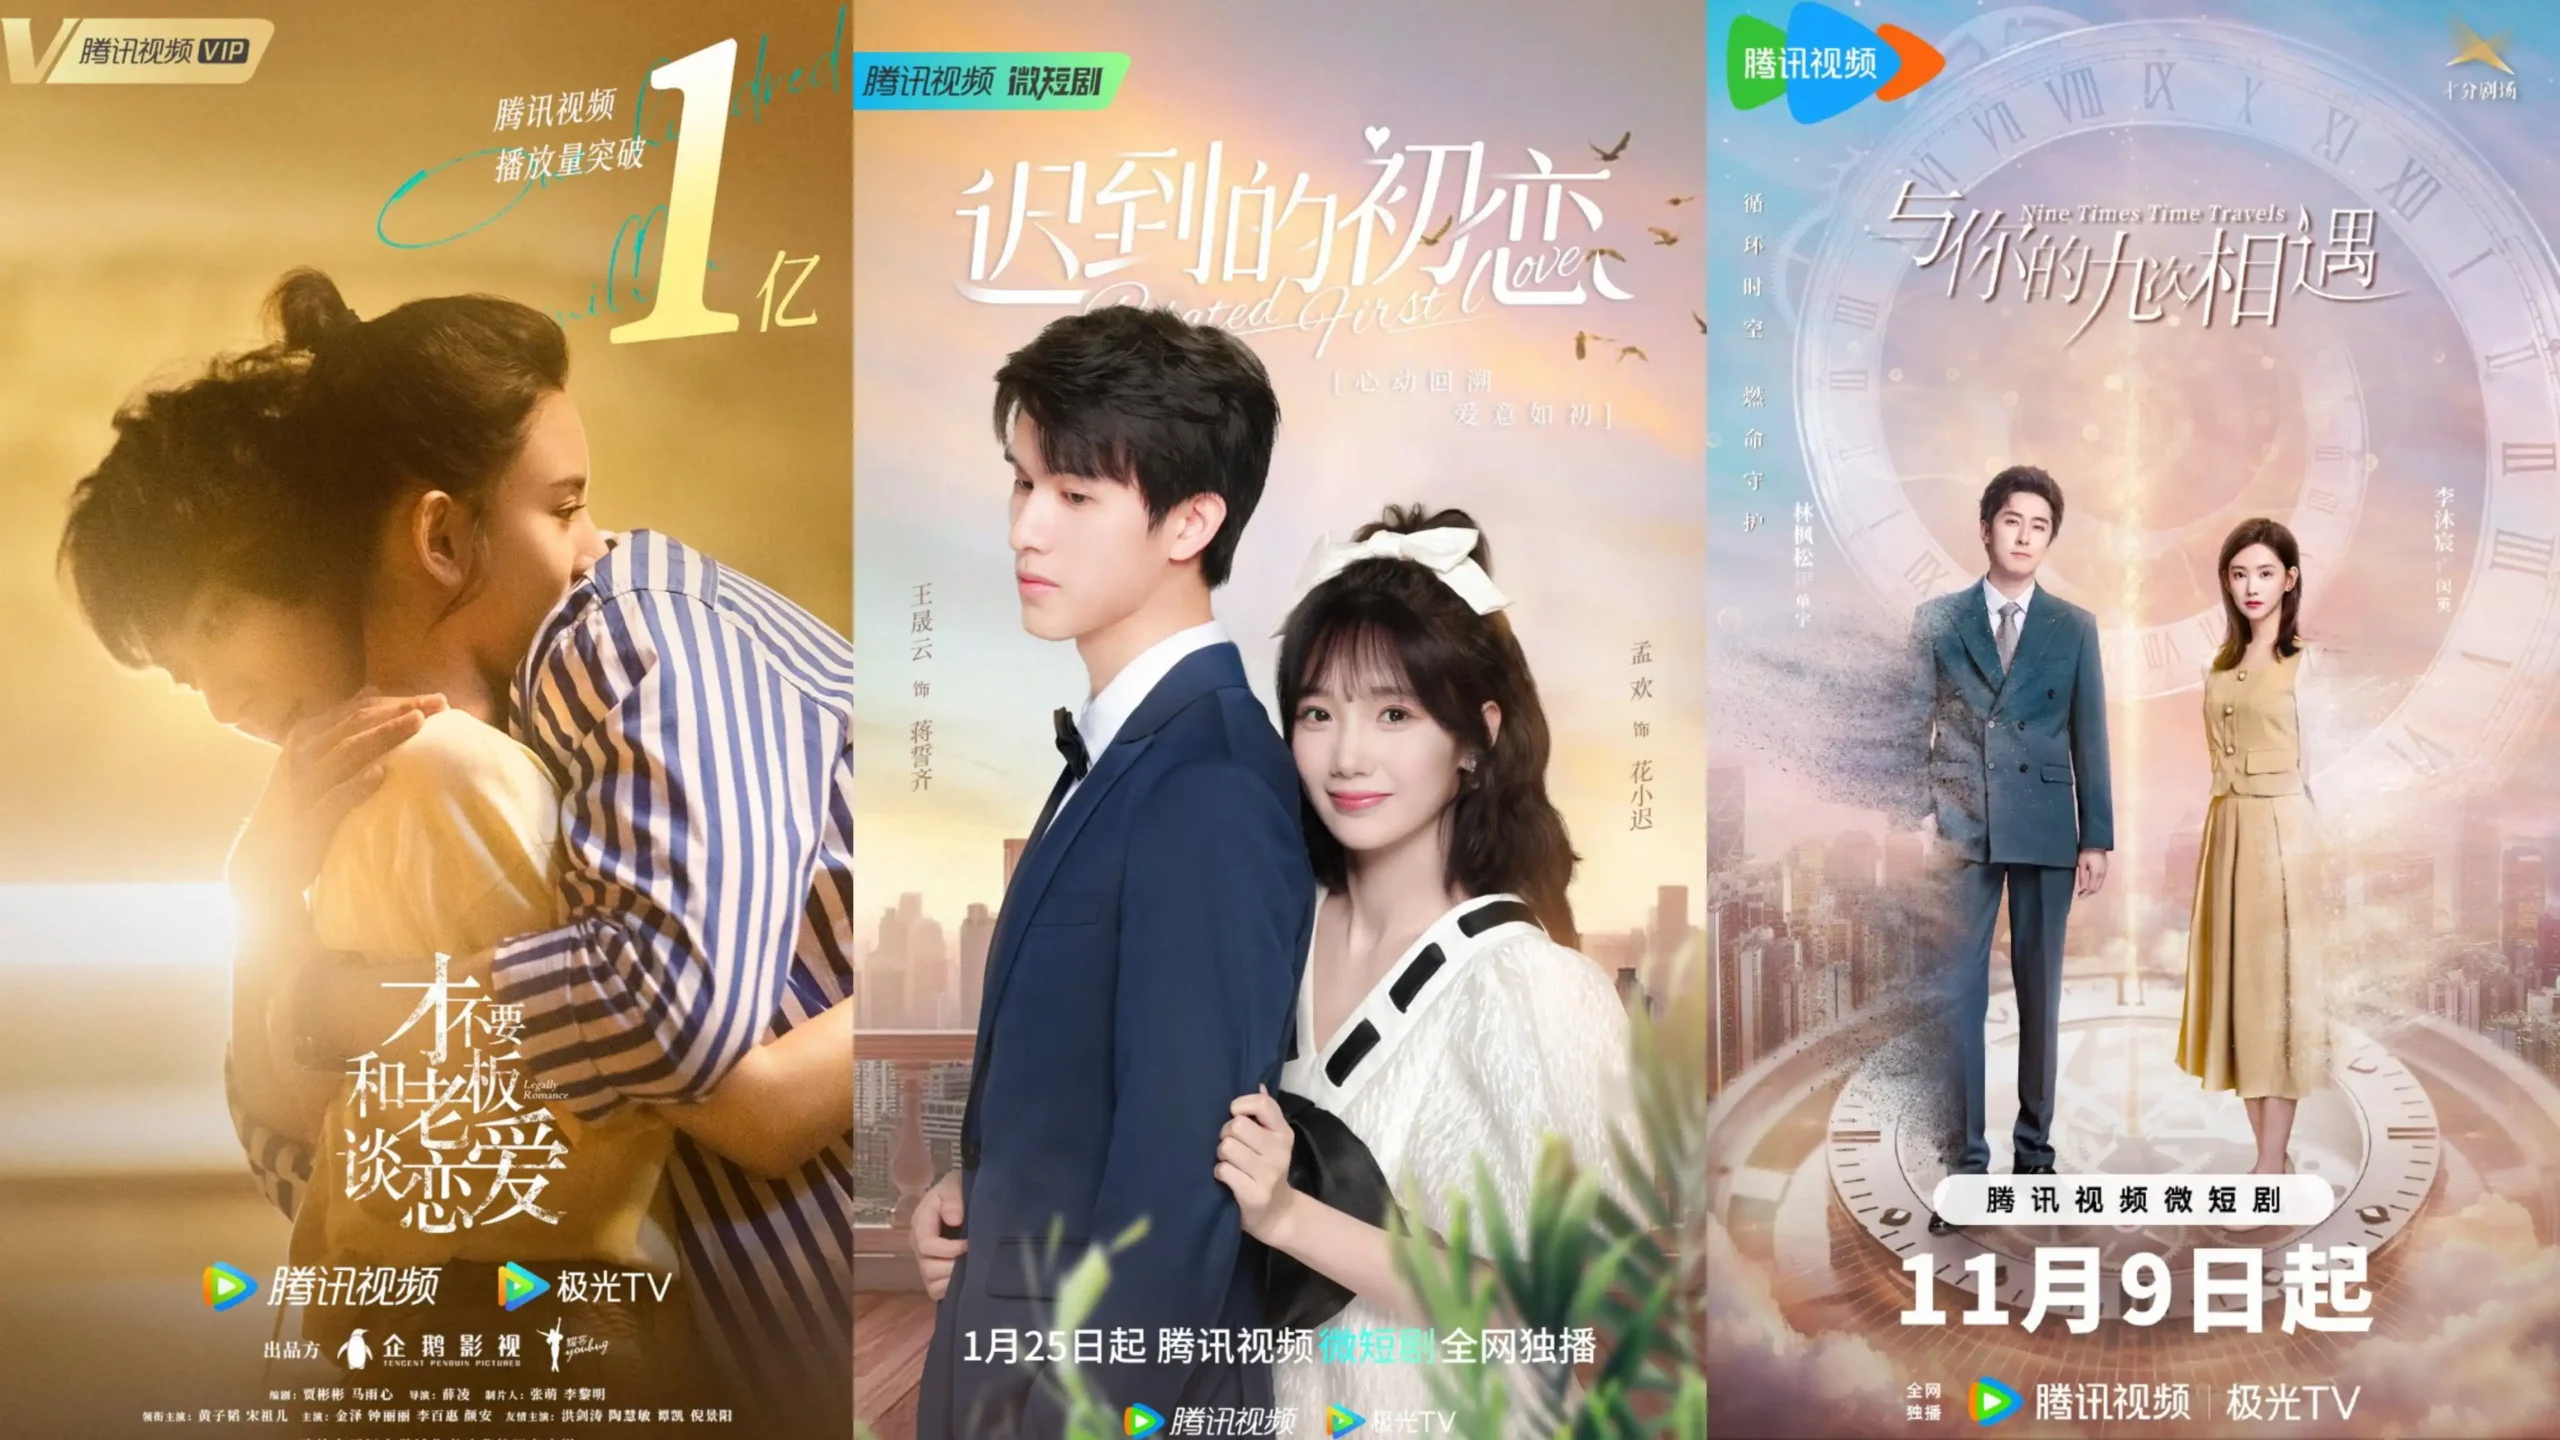 Best time travel Chinese dramas to watch scaled